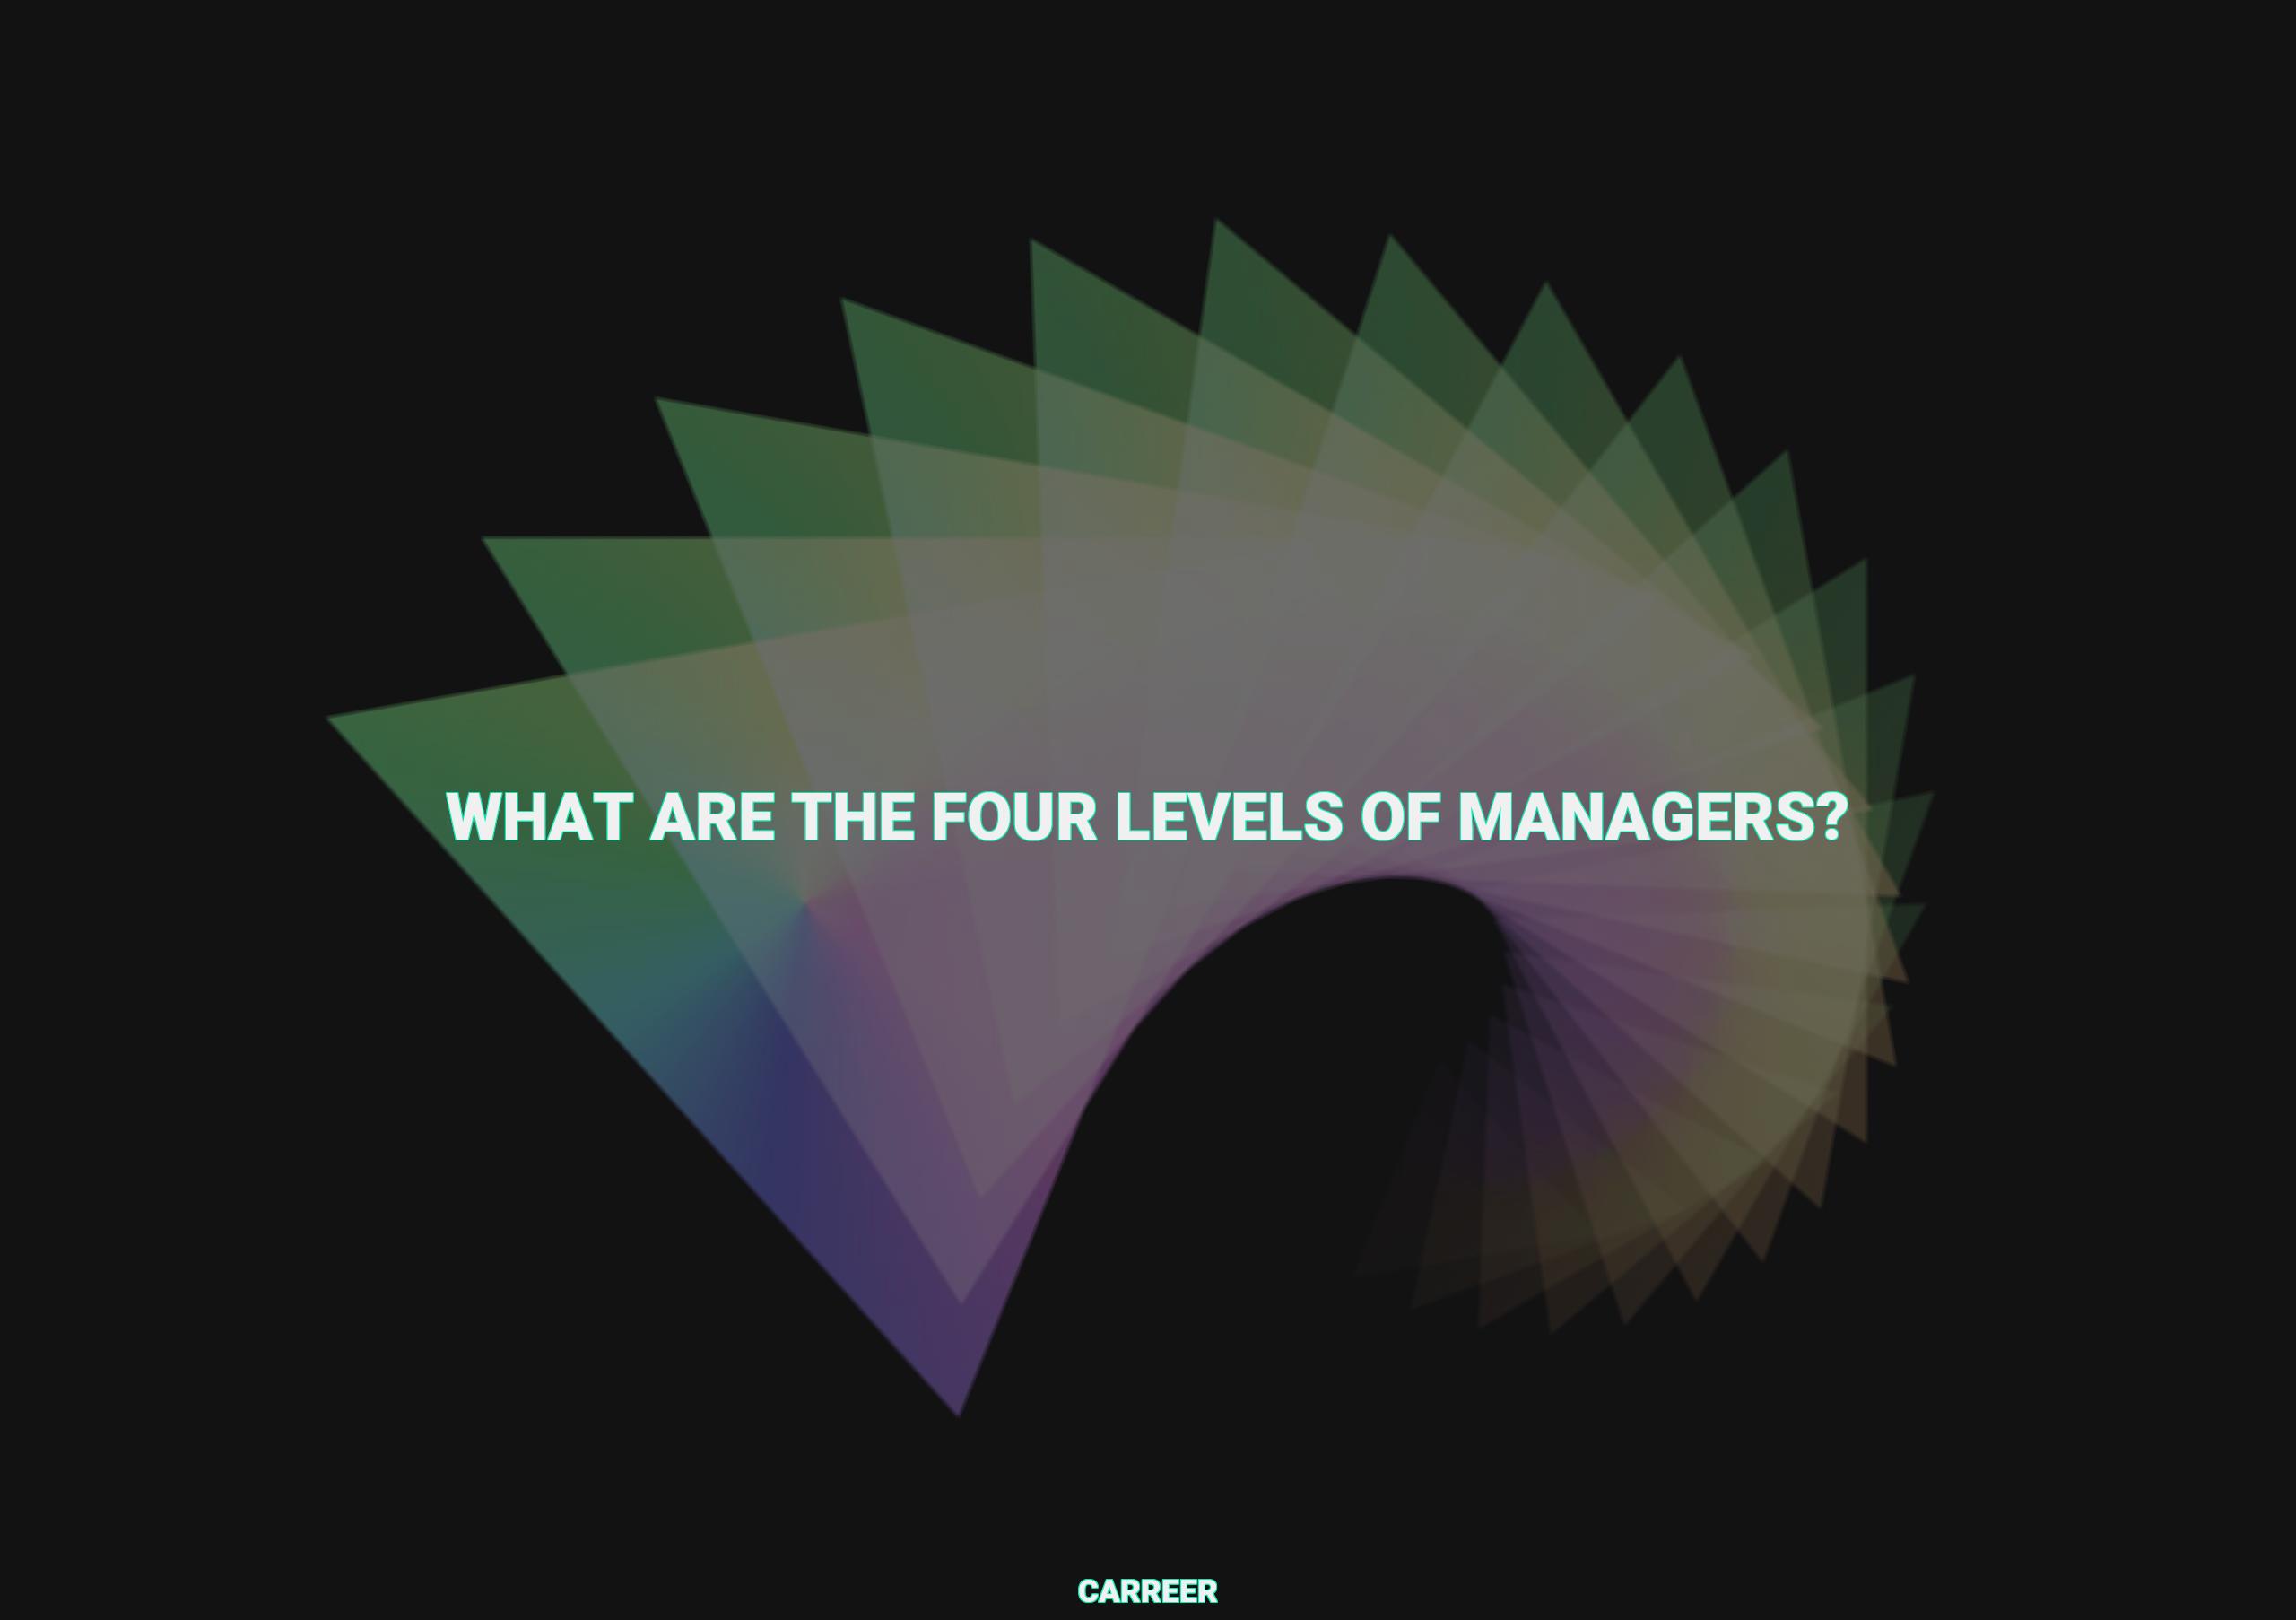 What are the four levels of managers?